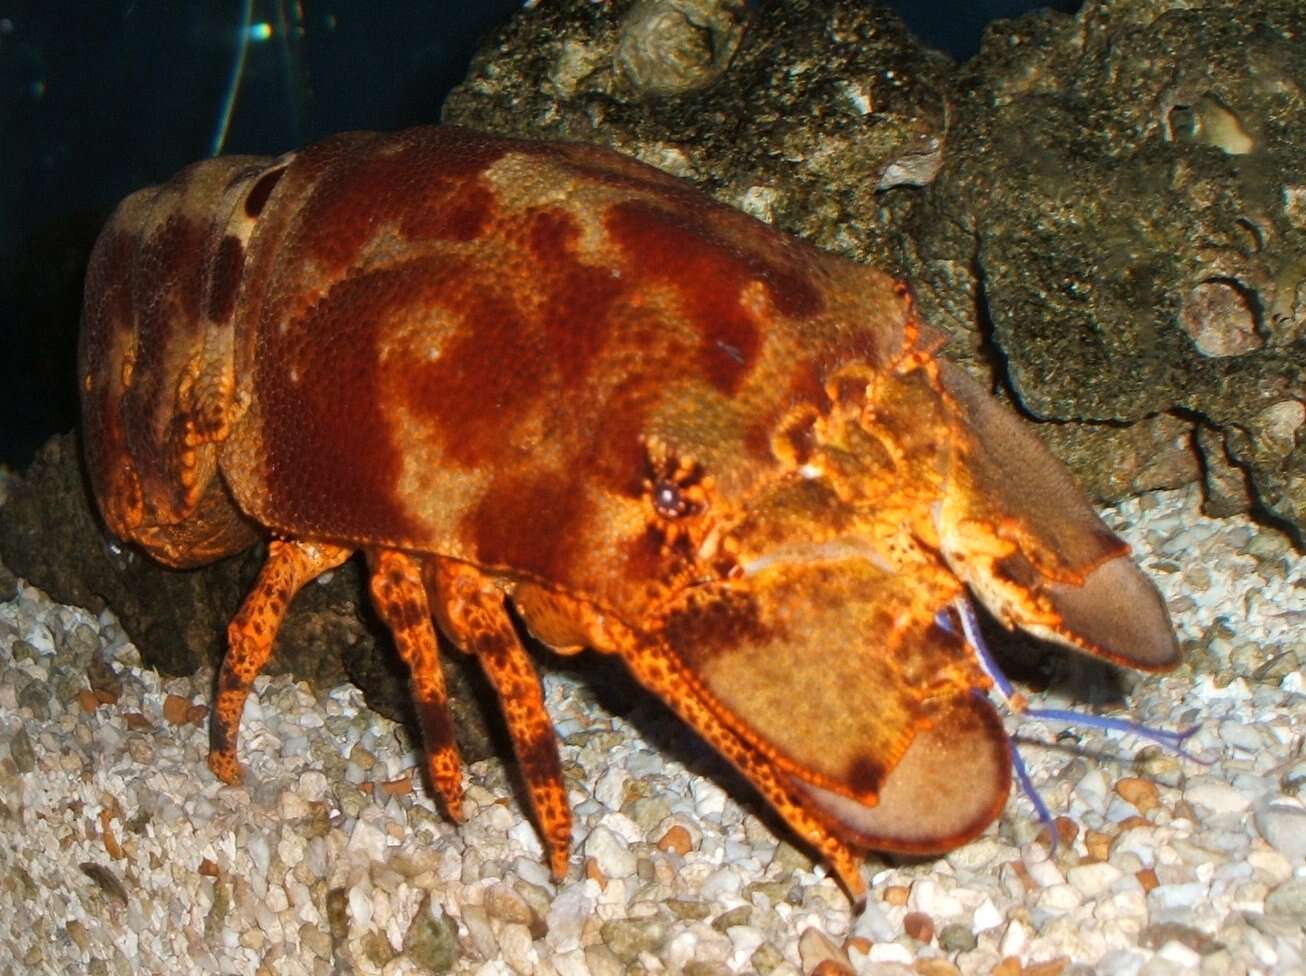 Image of mitten lobsters